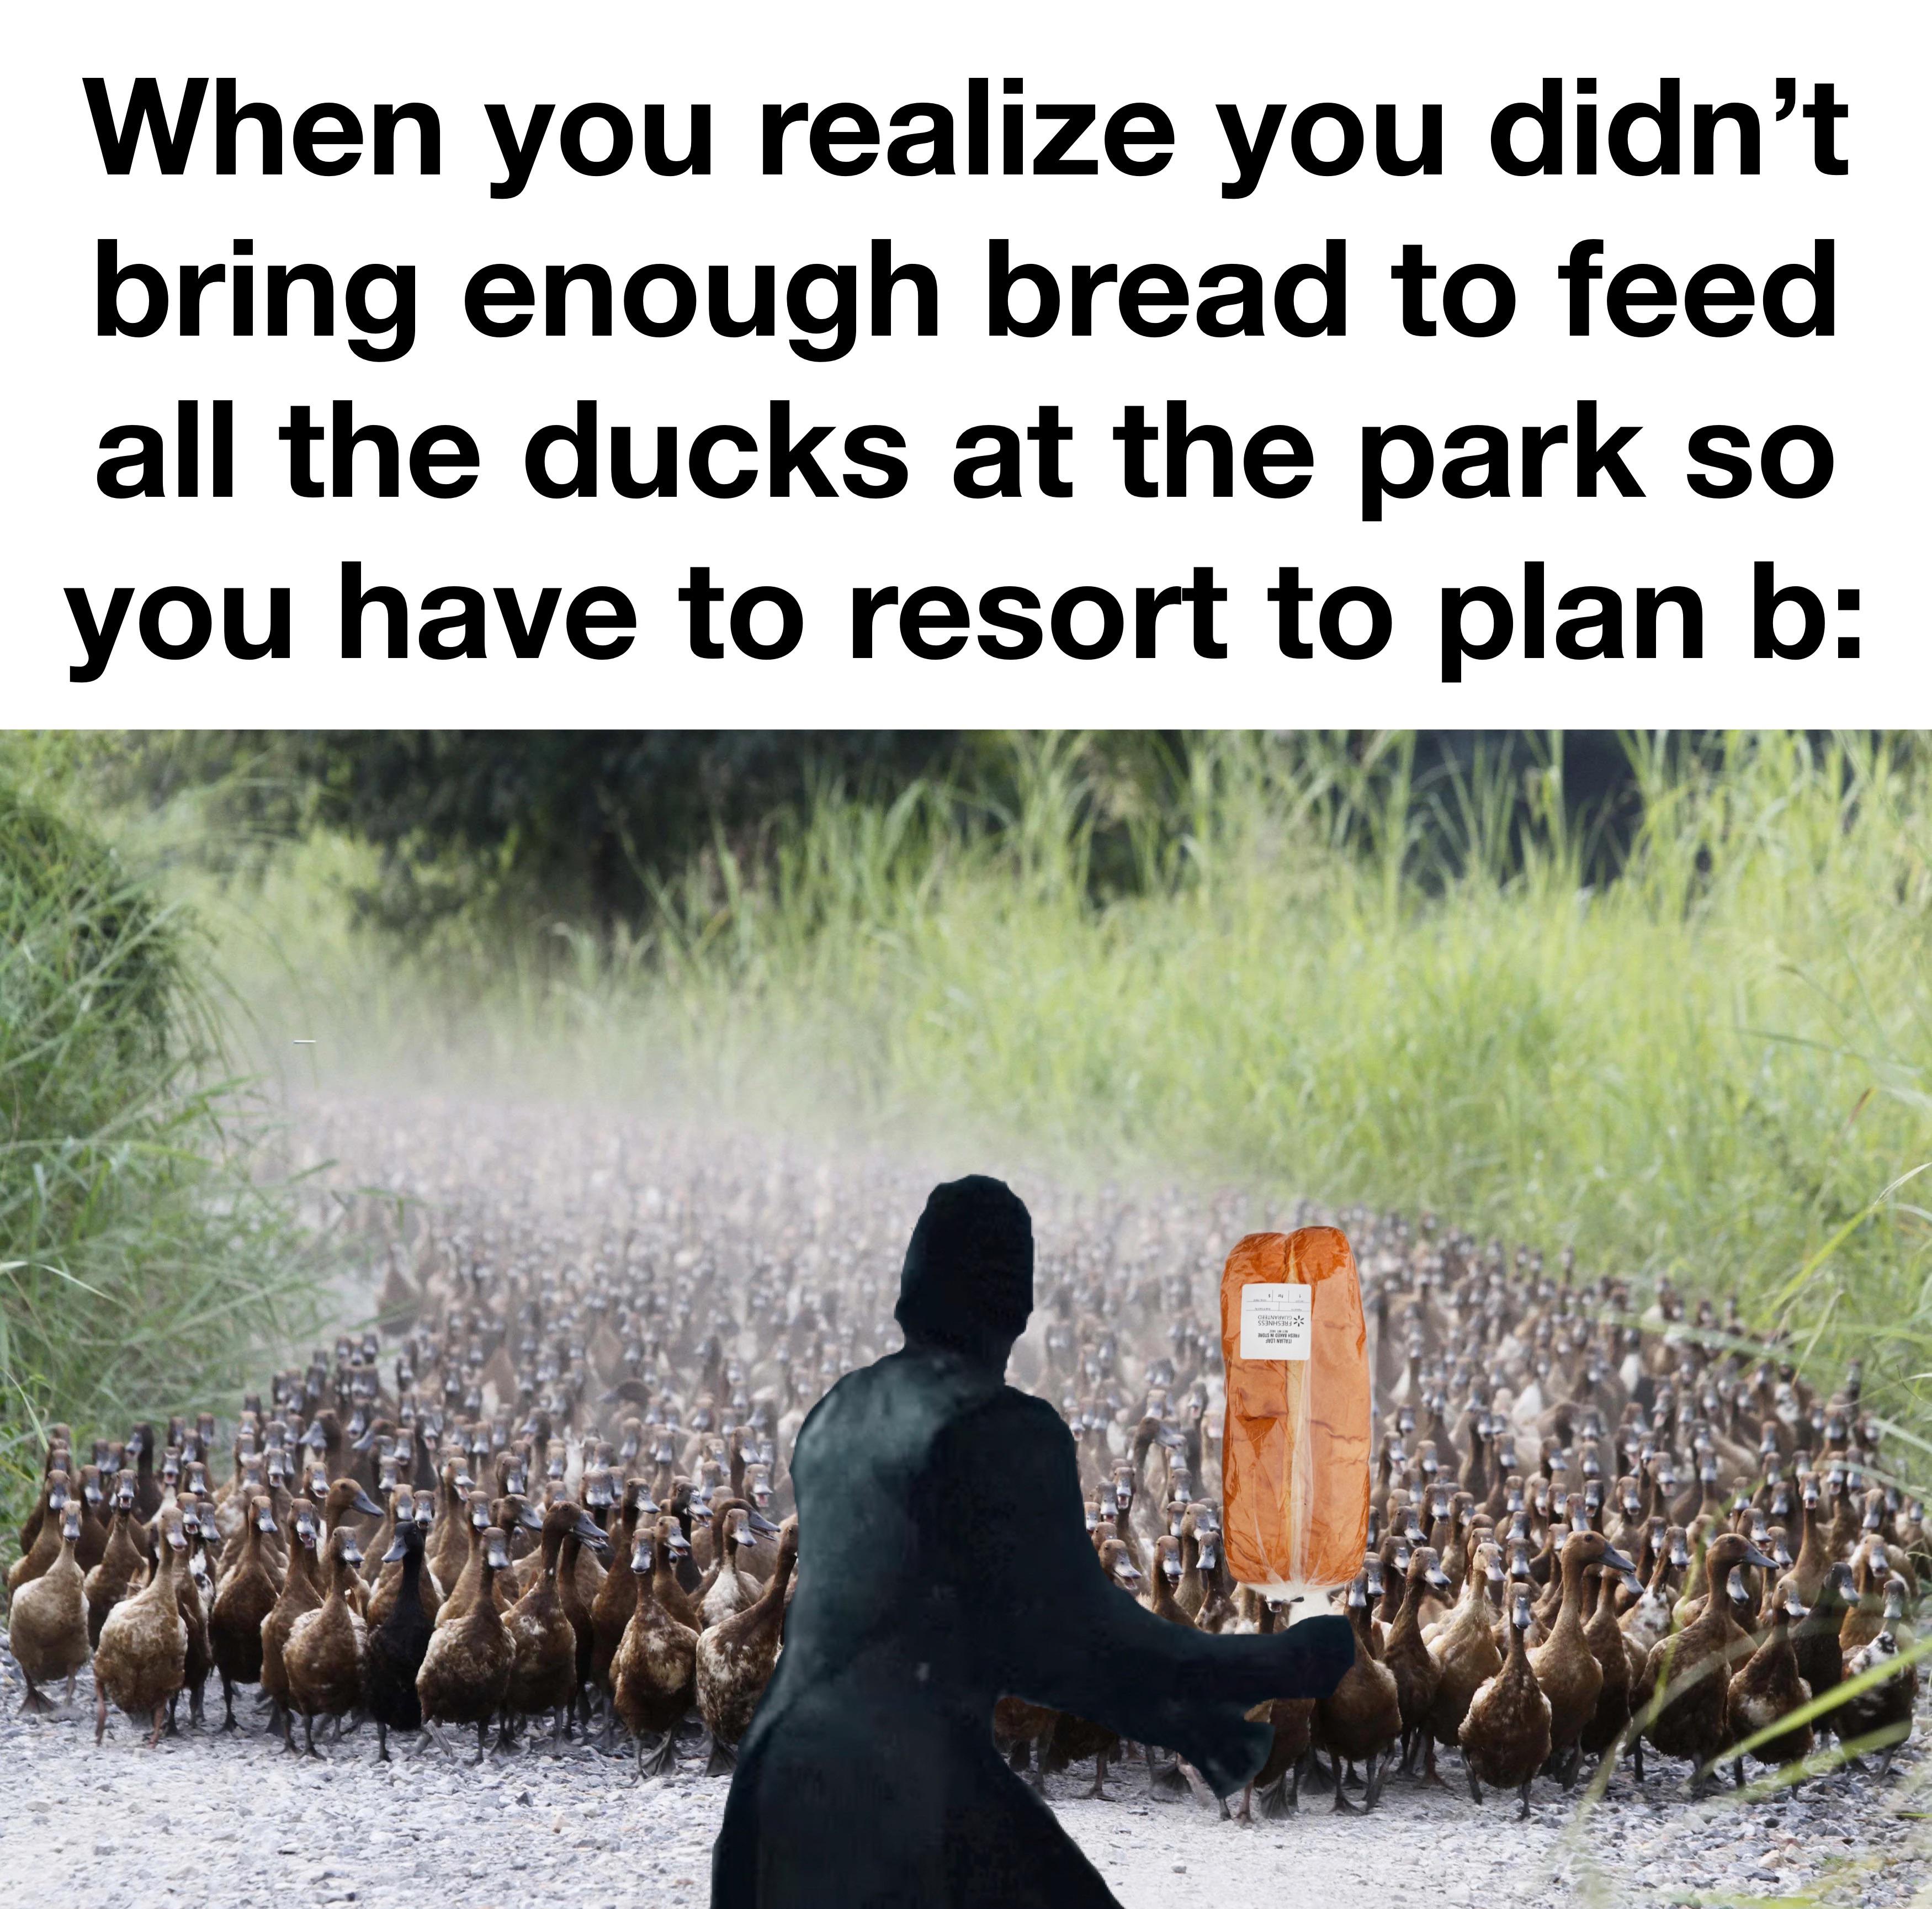 funny memes and pics - fauna - When you realize you didn't bring enough bread to feed all the ducks at the park so you have to resort to plan b